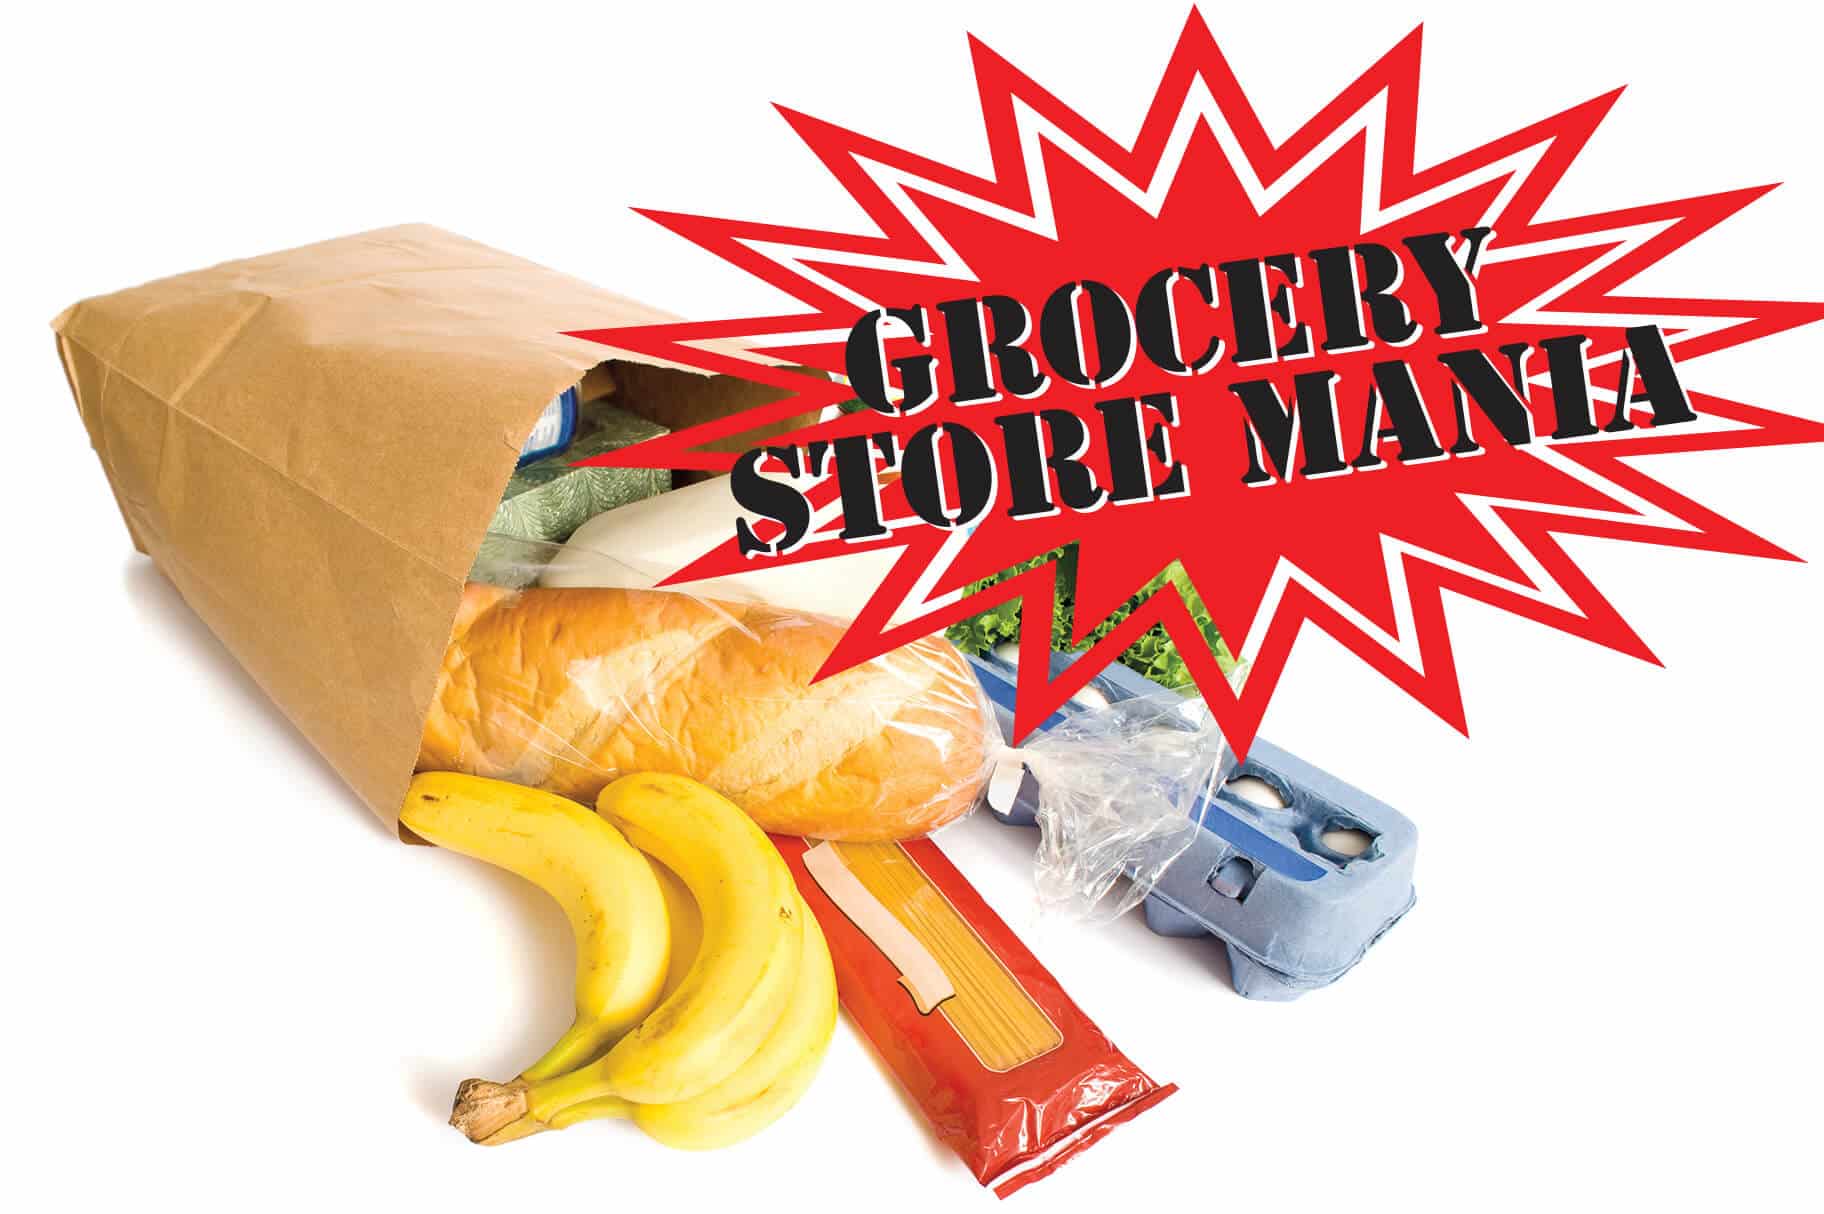 grocery store mania